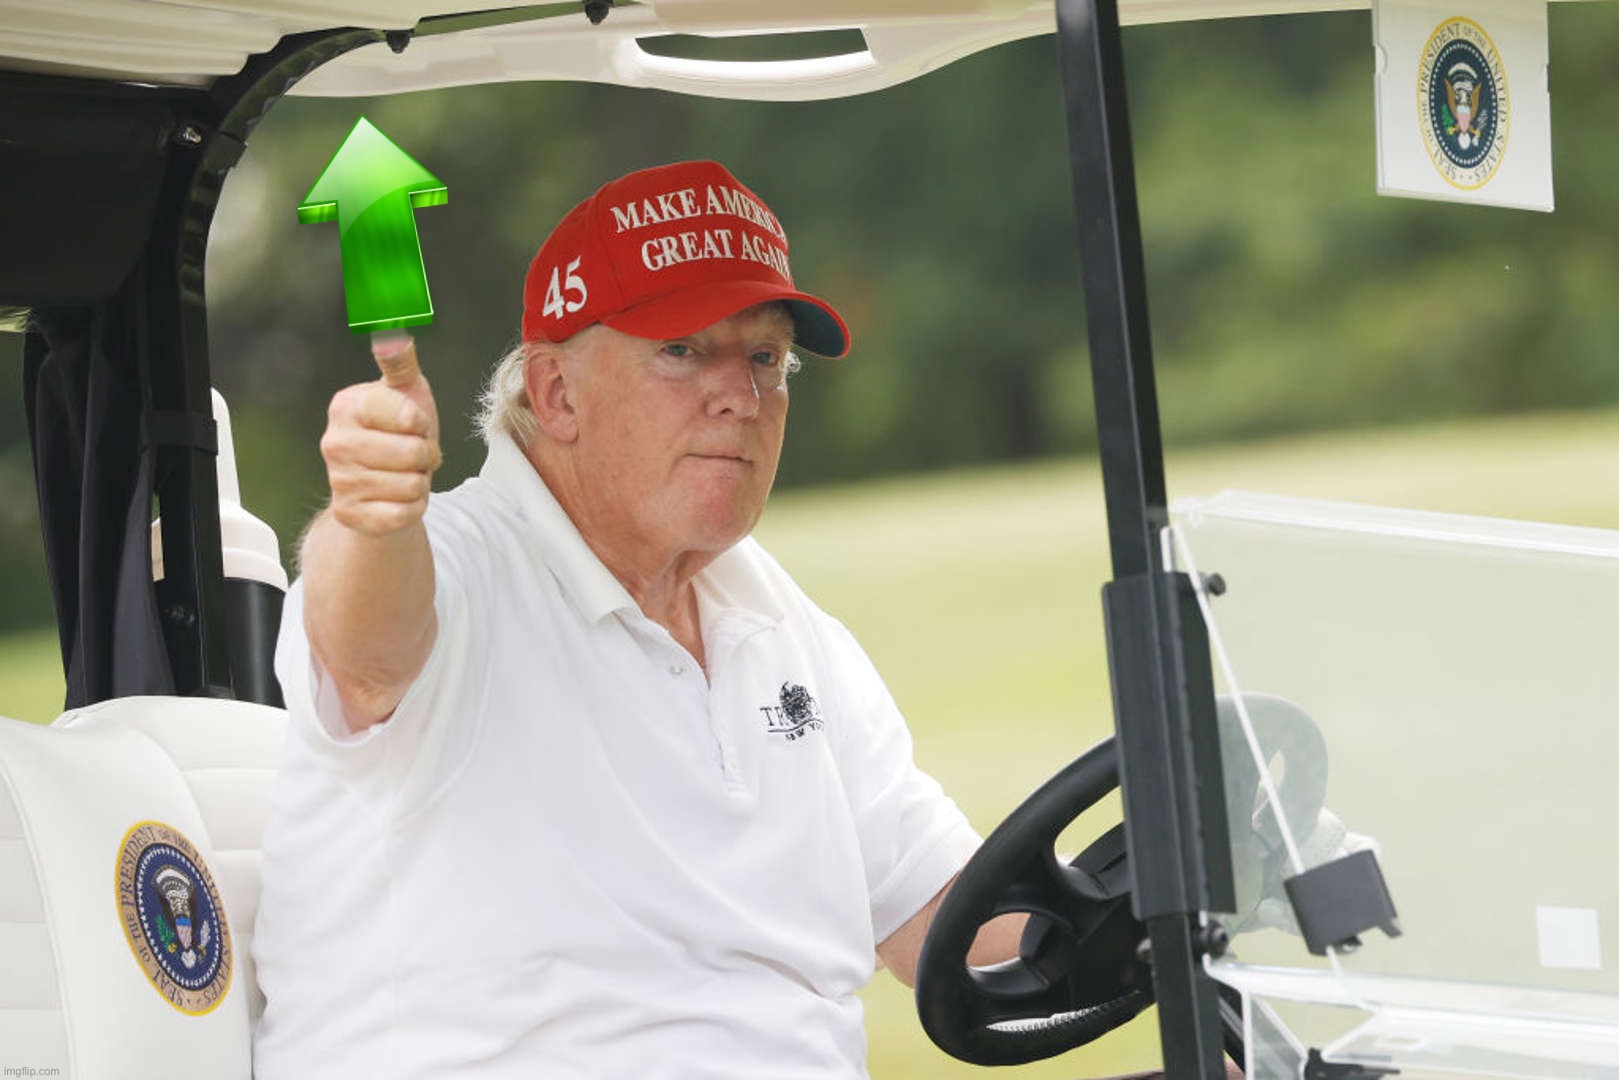 Donald Trump golf cart upvote 2 | image tagged in donald trump golf cart upvote 2 | made w/ Imgflip meme maker